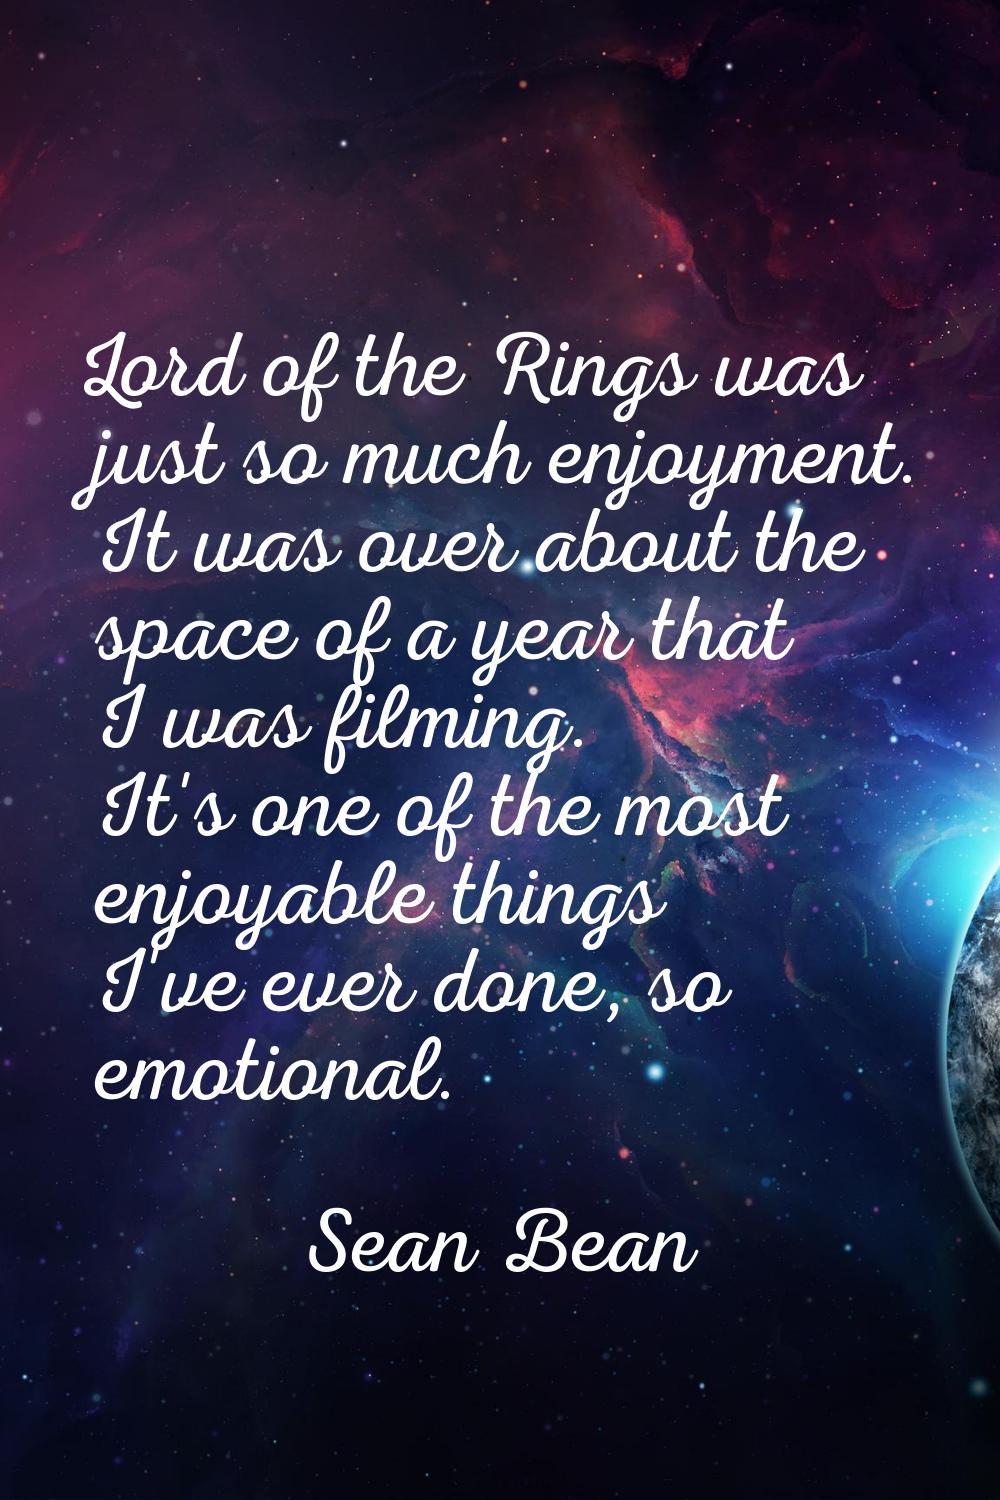 Lord of the Rings was just so much enjoyment. It was over about the space of a year that I was film